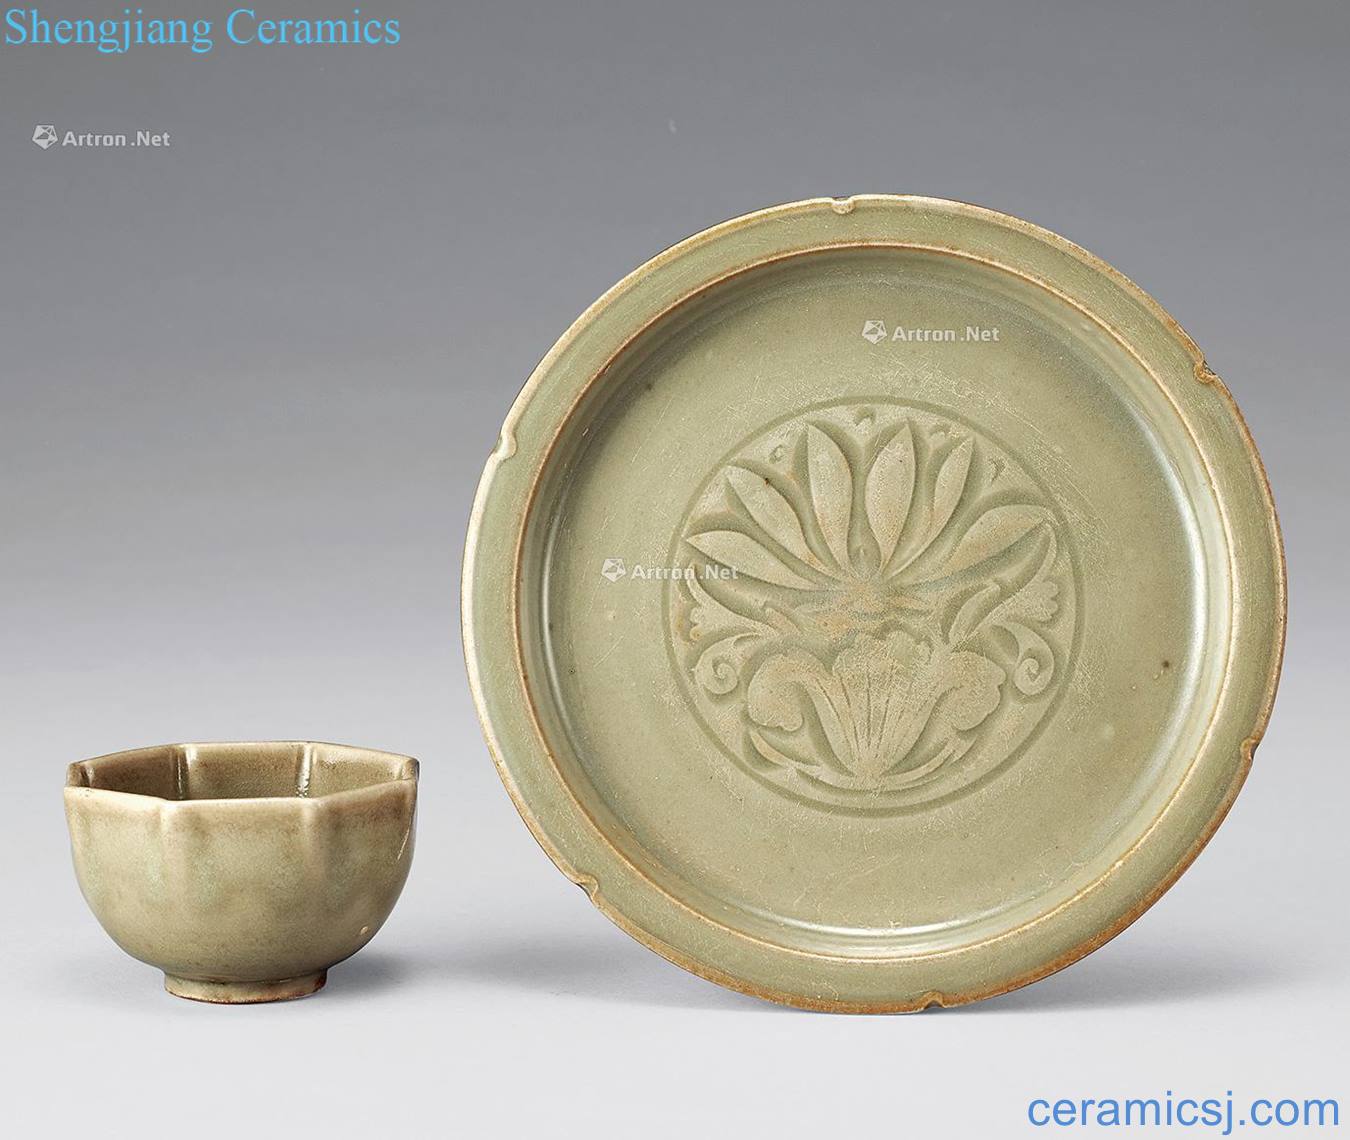 The southern song dynasty tea yao state kiln, (2)